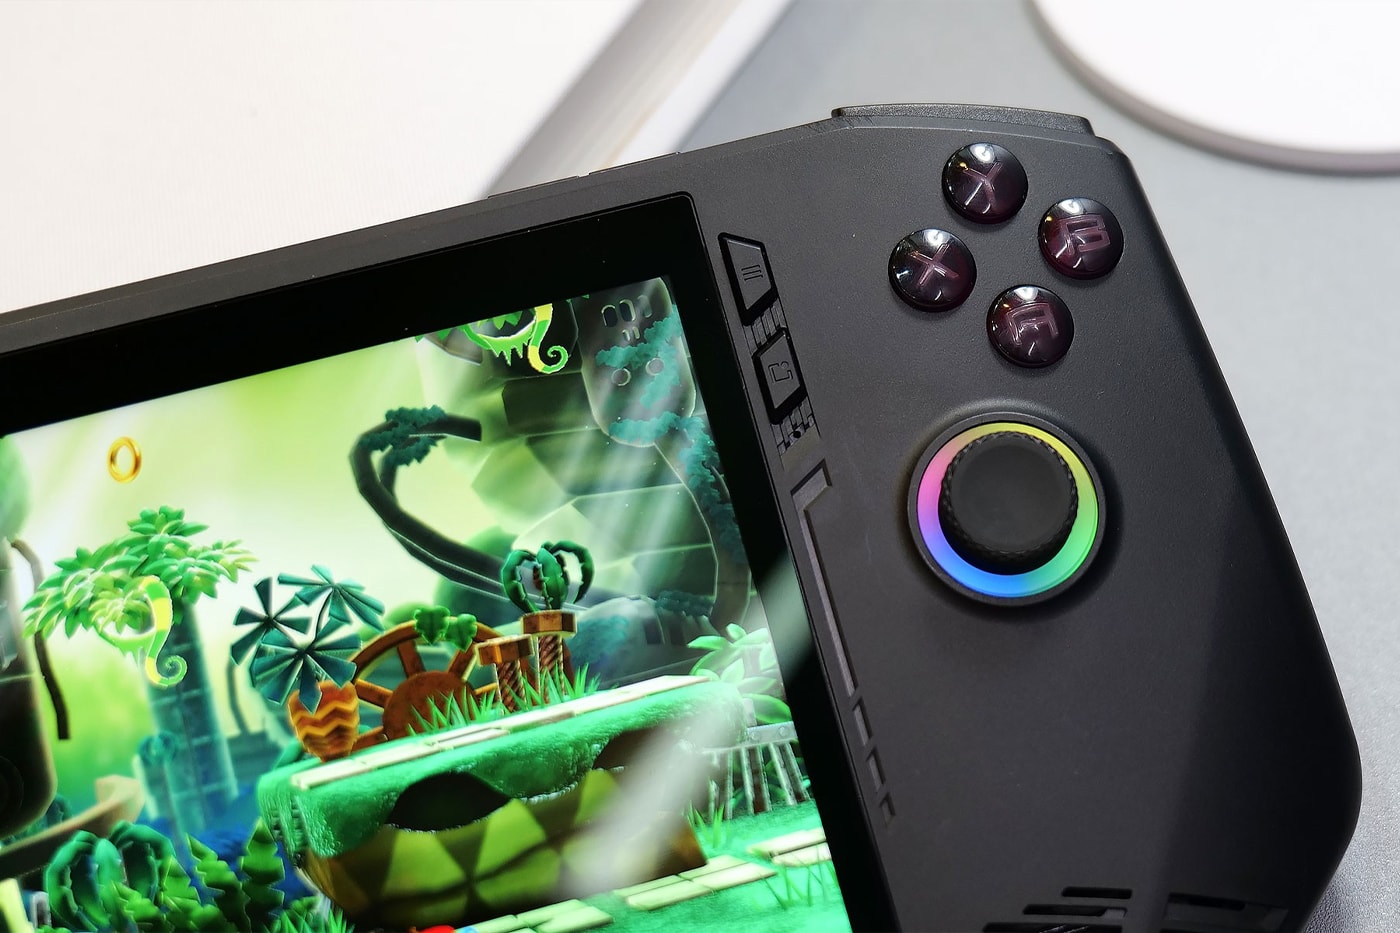 Intel-Powered MSI Claw Handheld Gaming Console